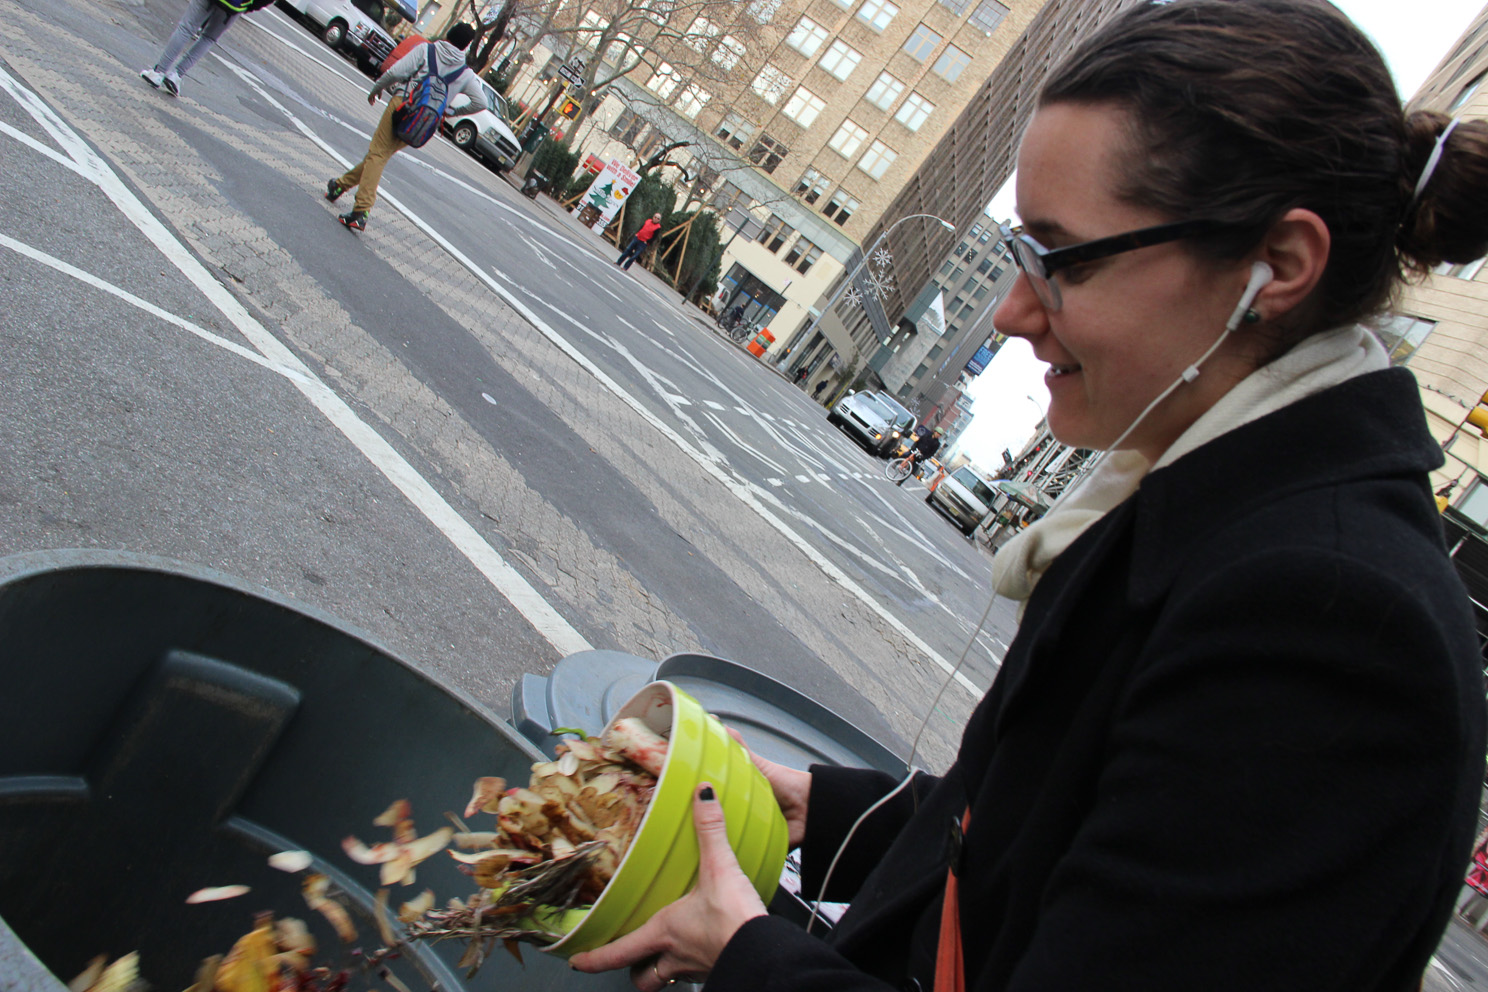 Dumping vegetable scraps at Spring St. and Sixth Ave. at the composting drop-off spot. Photos by Tequila Minsky